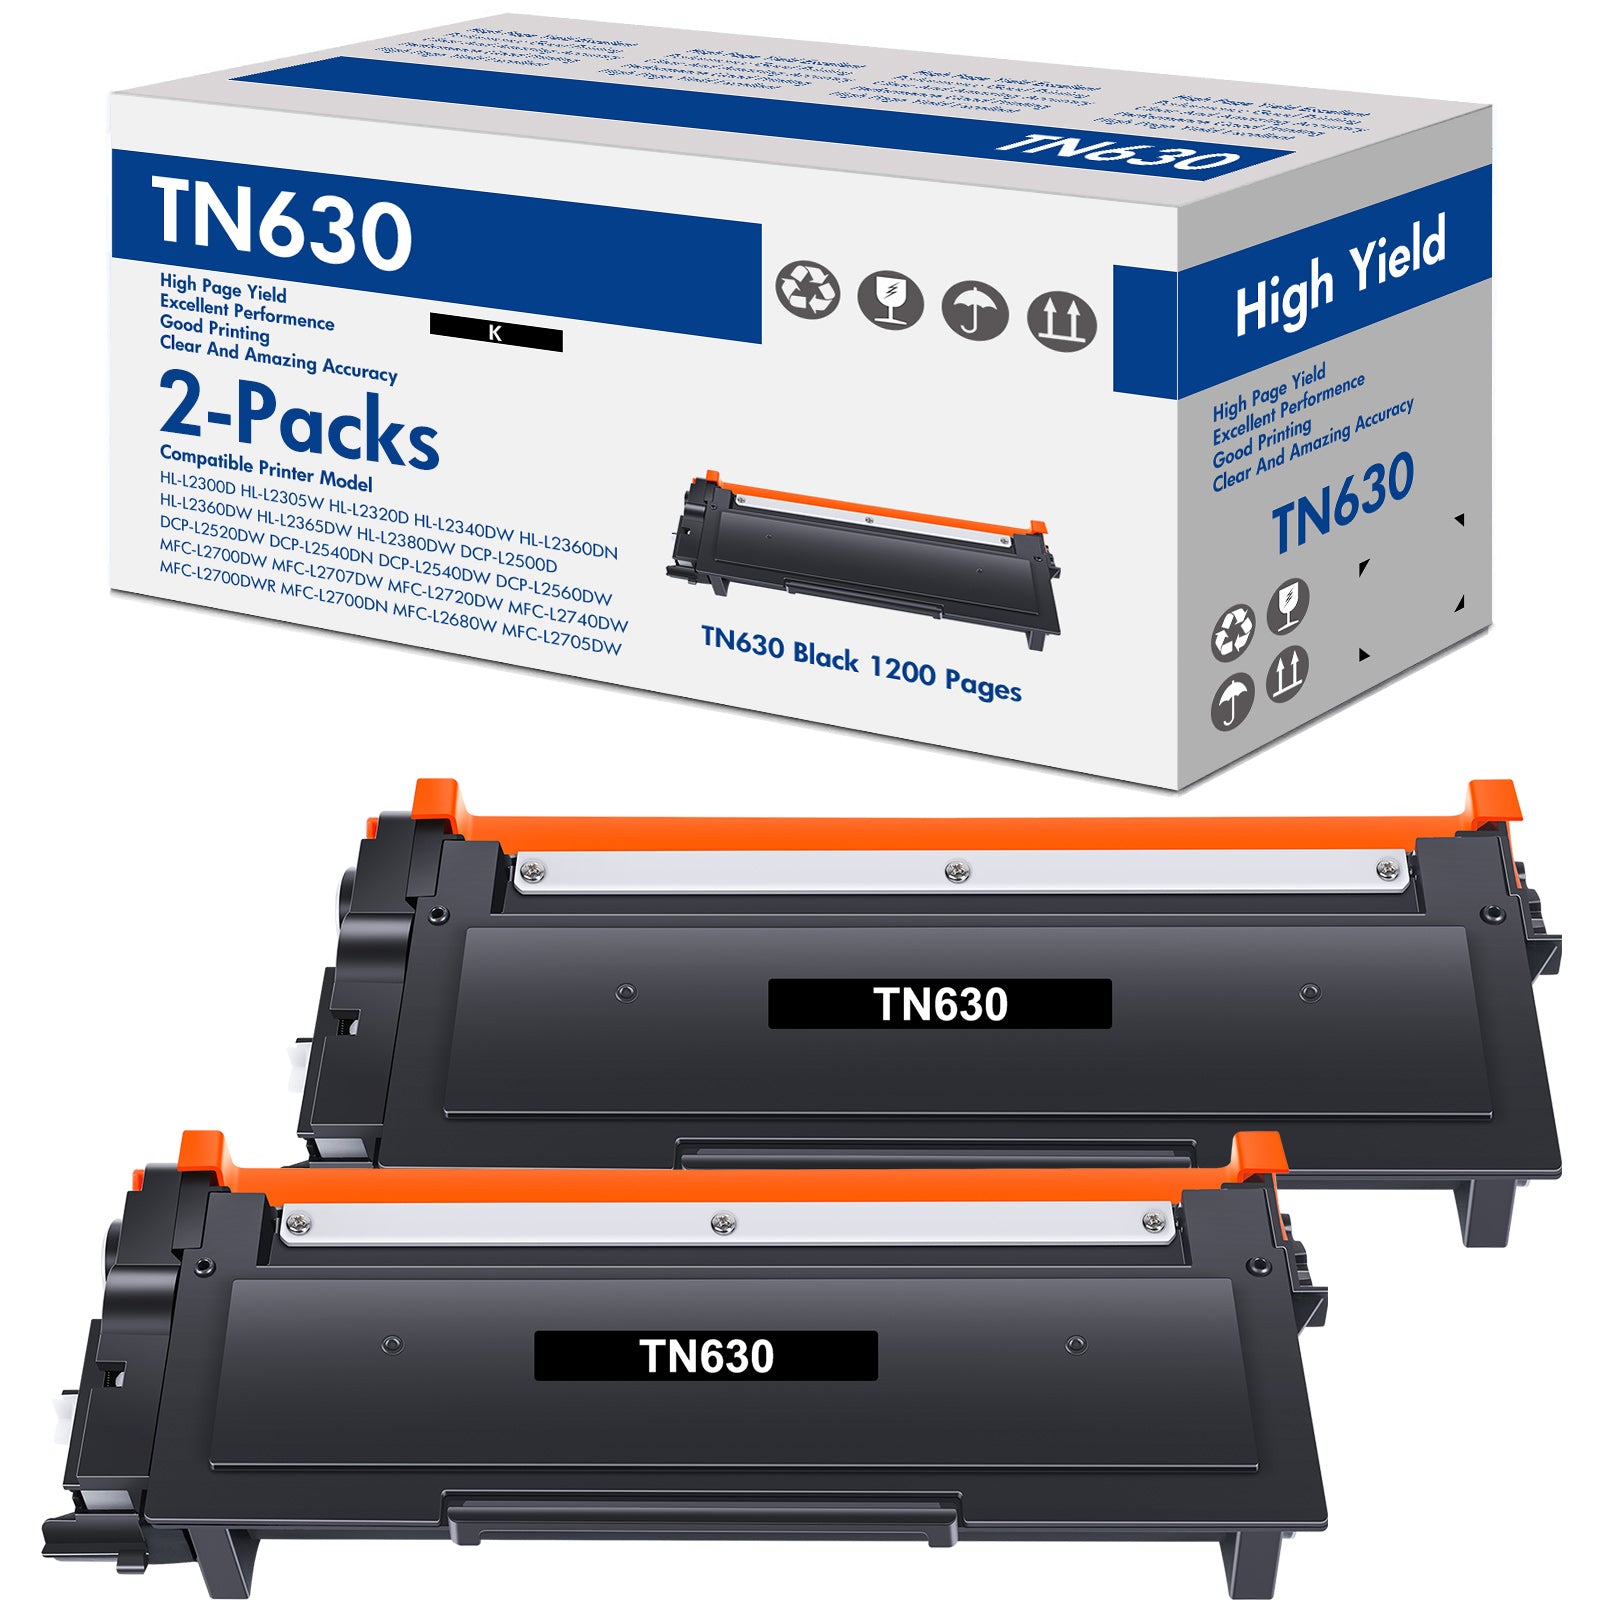 TN630 TN-630 Toner Cartridge Compatible for Brother TN-630 TN630 TN660 TN-660 MFC-L2700DW MFC-L2740DW HL-L2380DW HL-L2340DW DCP-L2540DW DCP-L2500D (Black,2-Pack)